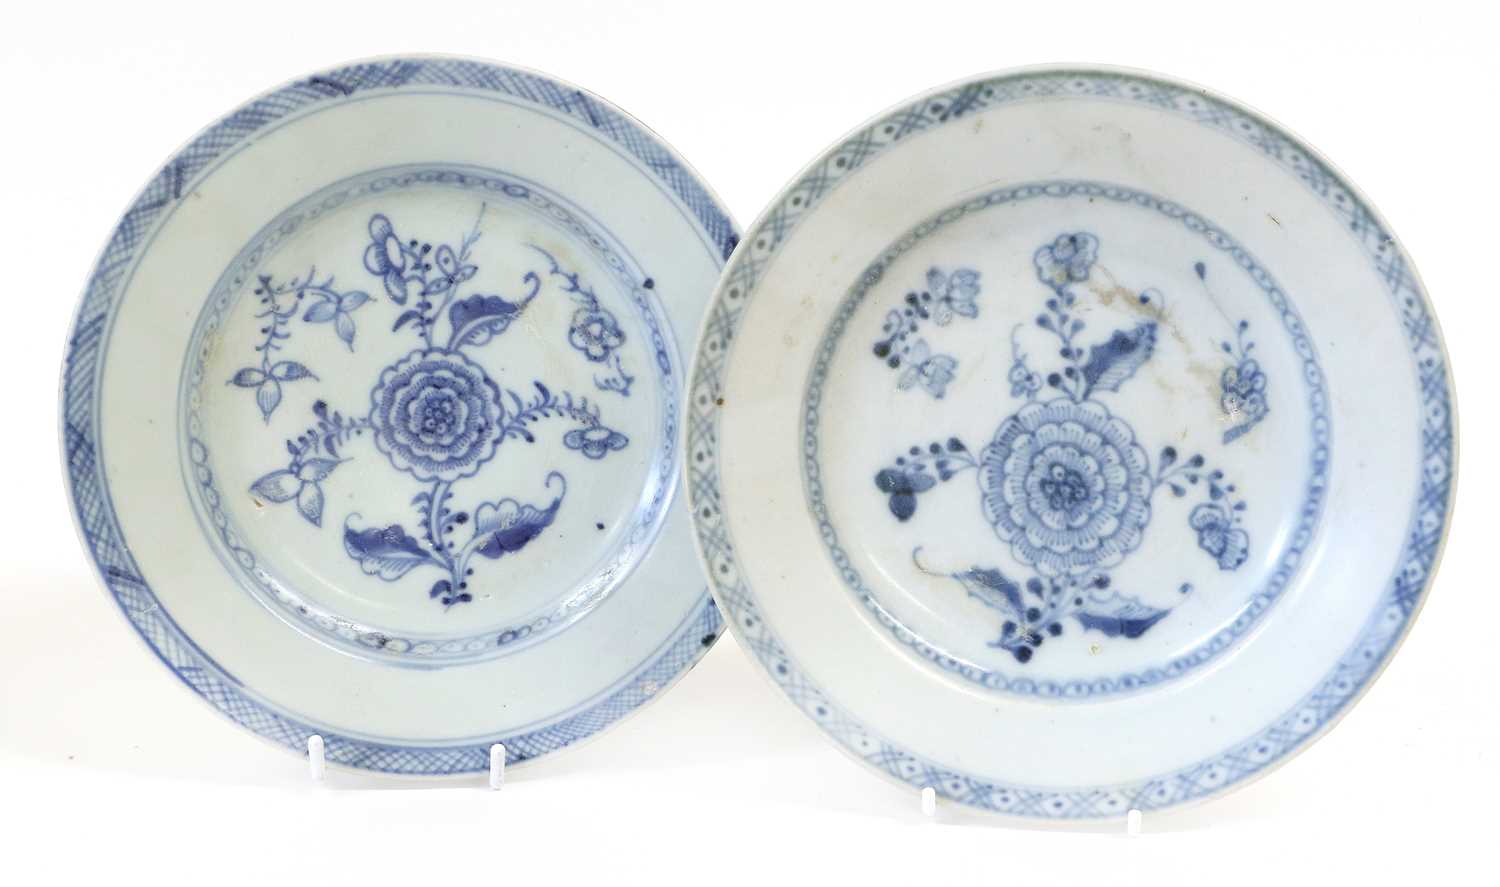 Two Chinese Porcelain "Tek Sing" Bowls, each painted in underglaze blue with a boy in a landscape - Image 3 of 4